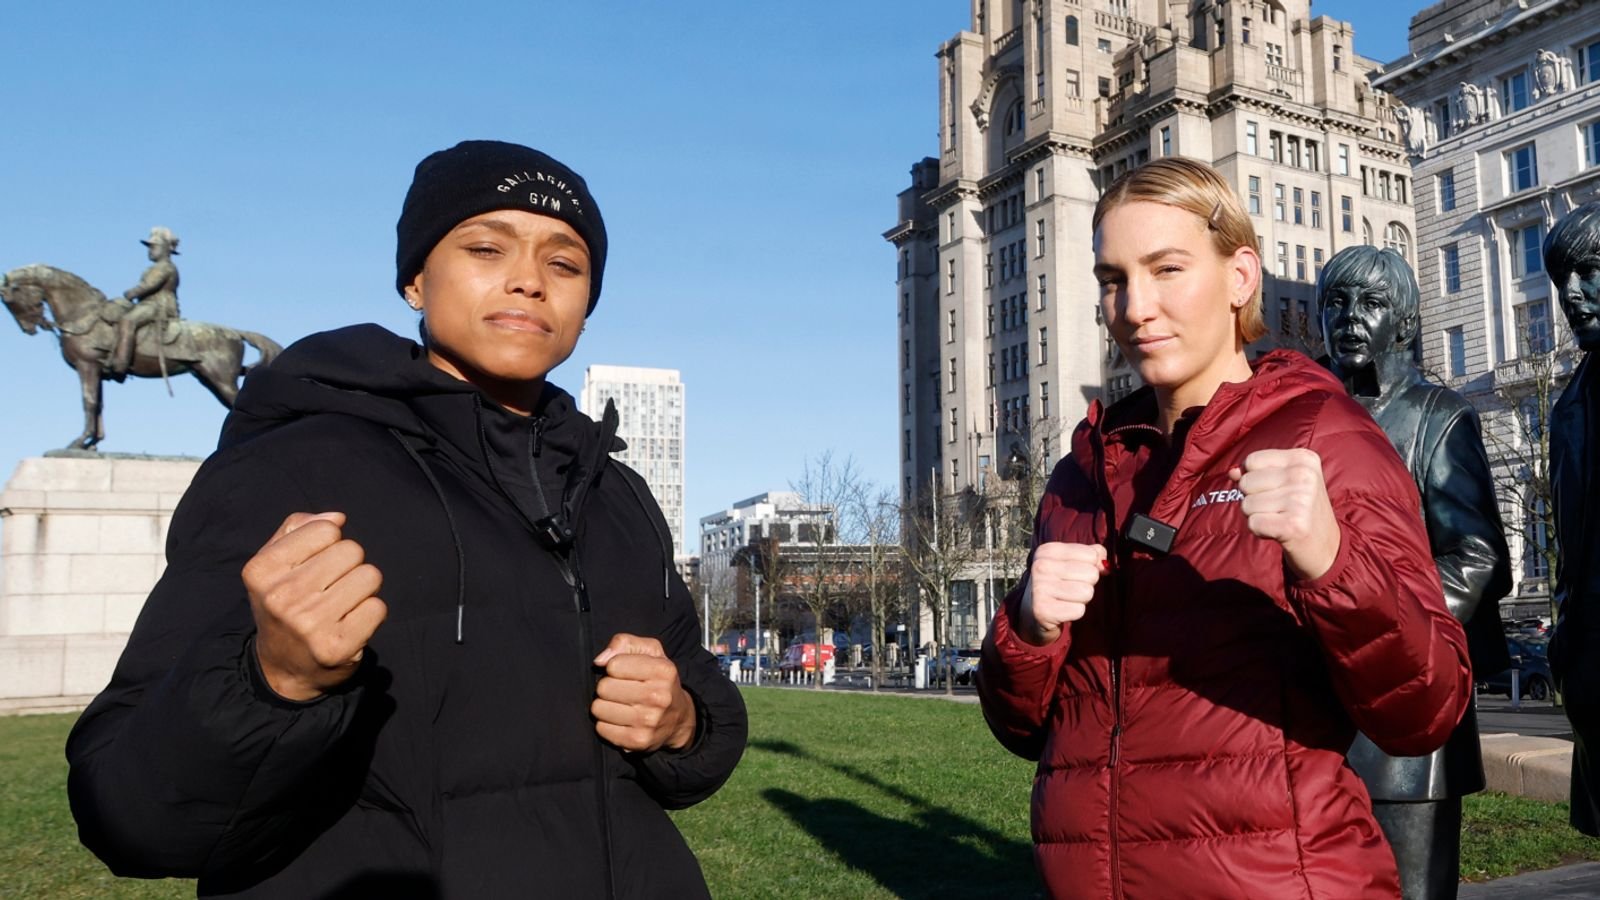 Mikaela Mayer lambasts an ‘unfair’ Natasha Jonas advantage: ‘She should feel silly going in the ring with that’ | Boxing News